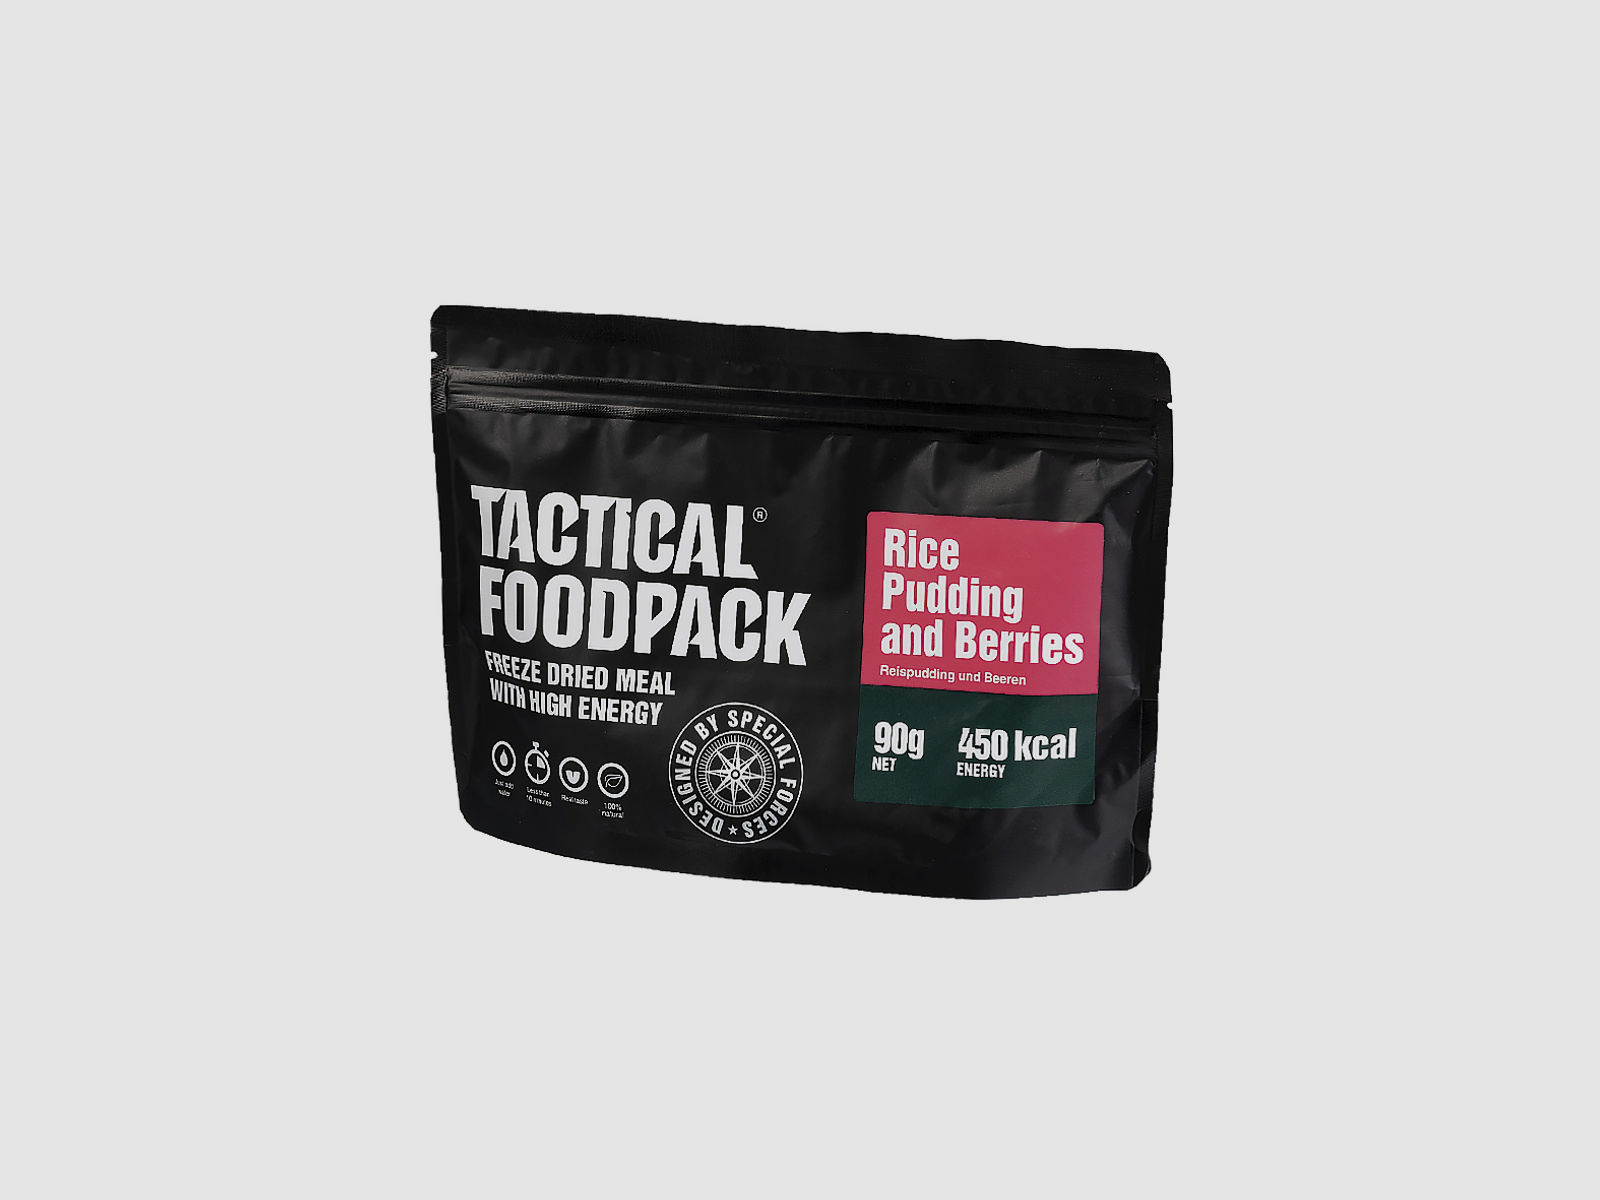 TACTICAL FOODPACK® RICE PUDDING AND BERRIES